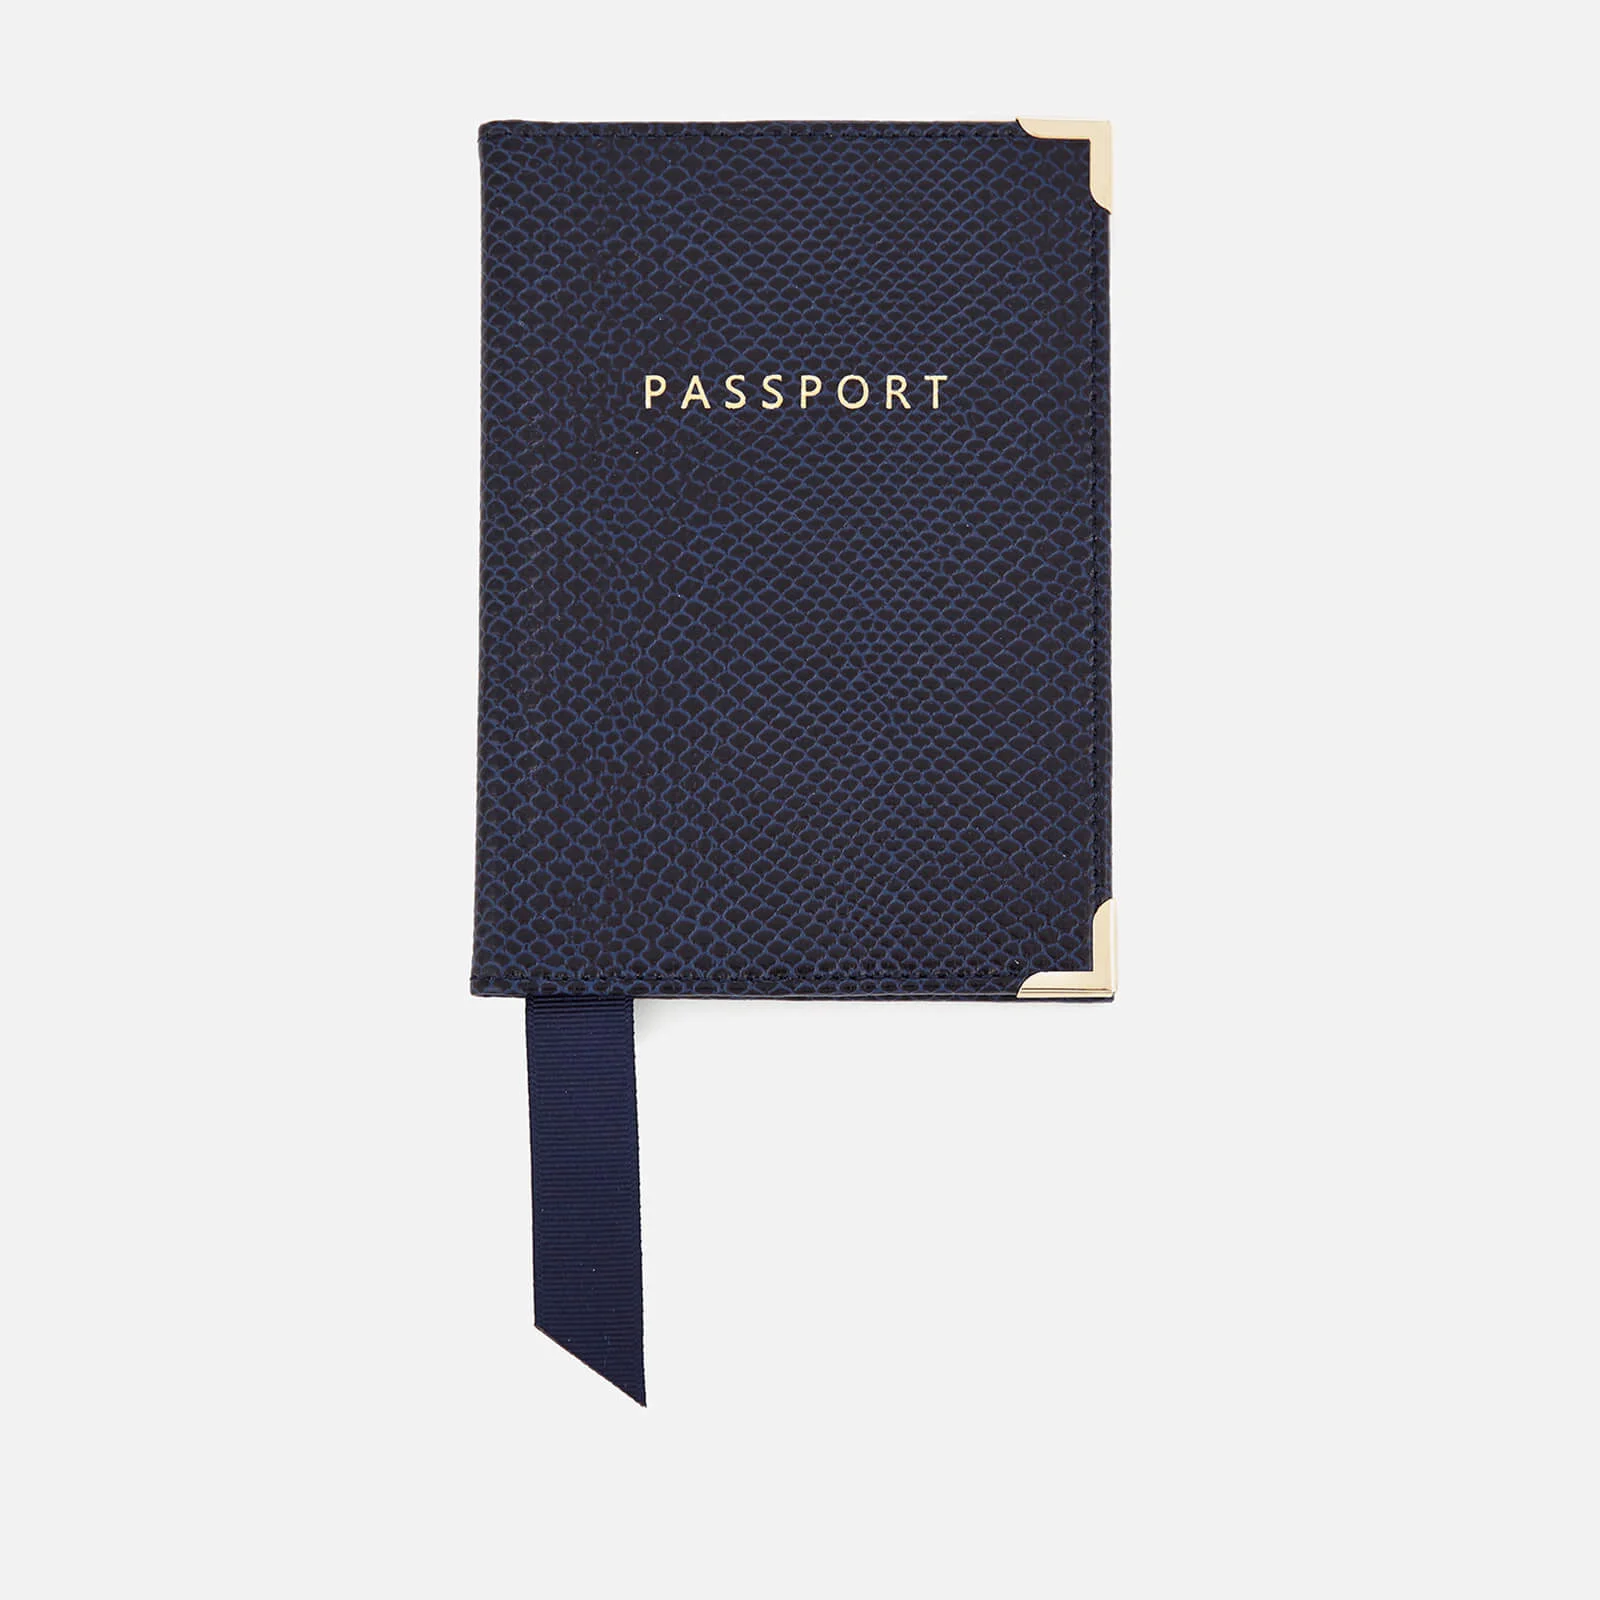 Aspinal of London Women's Passport Cover - Midnight Blue Image 1